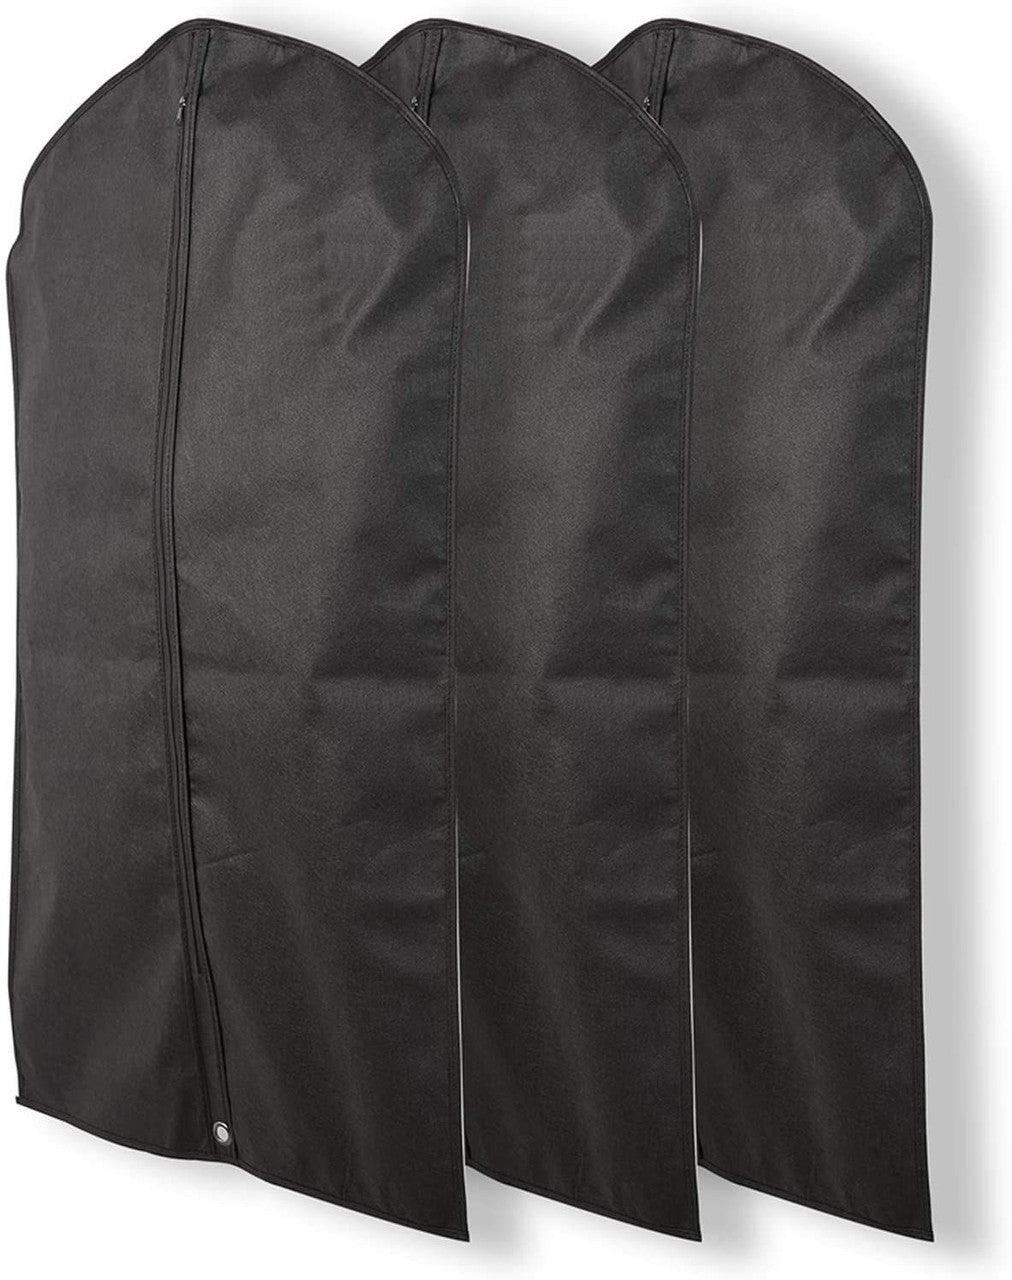 Black Non Woven Garment Bags 100 gsm for Clothing Storage of Suits, Dresses X 5/10/20 - Hangersforless